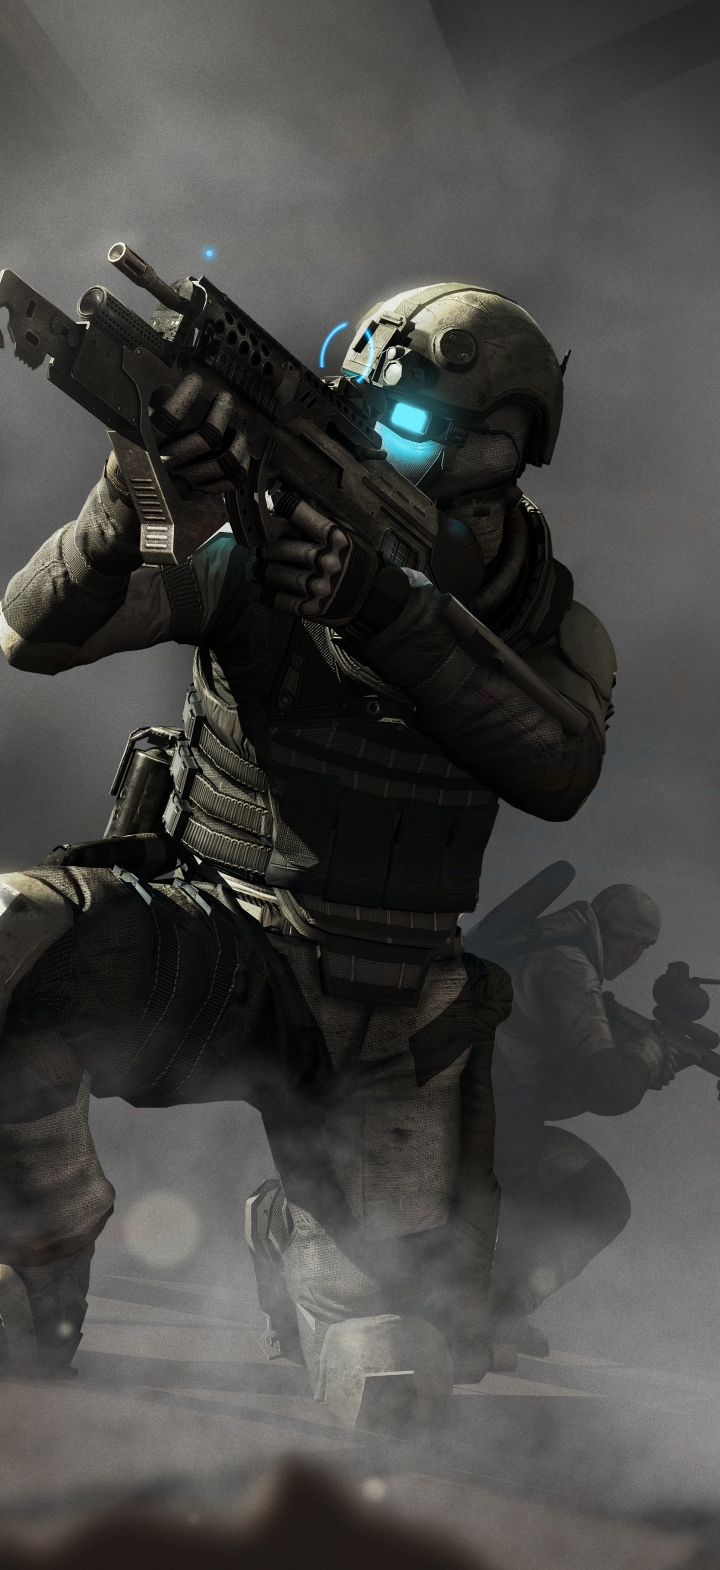 720x1570 Tom Clancys Ghost Recon Future Soldiers And Machine 720x1570 ...